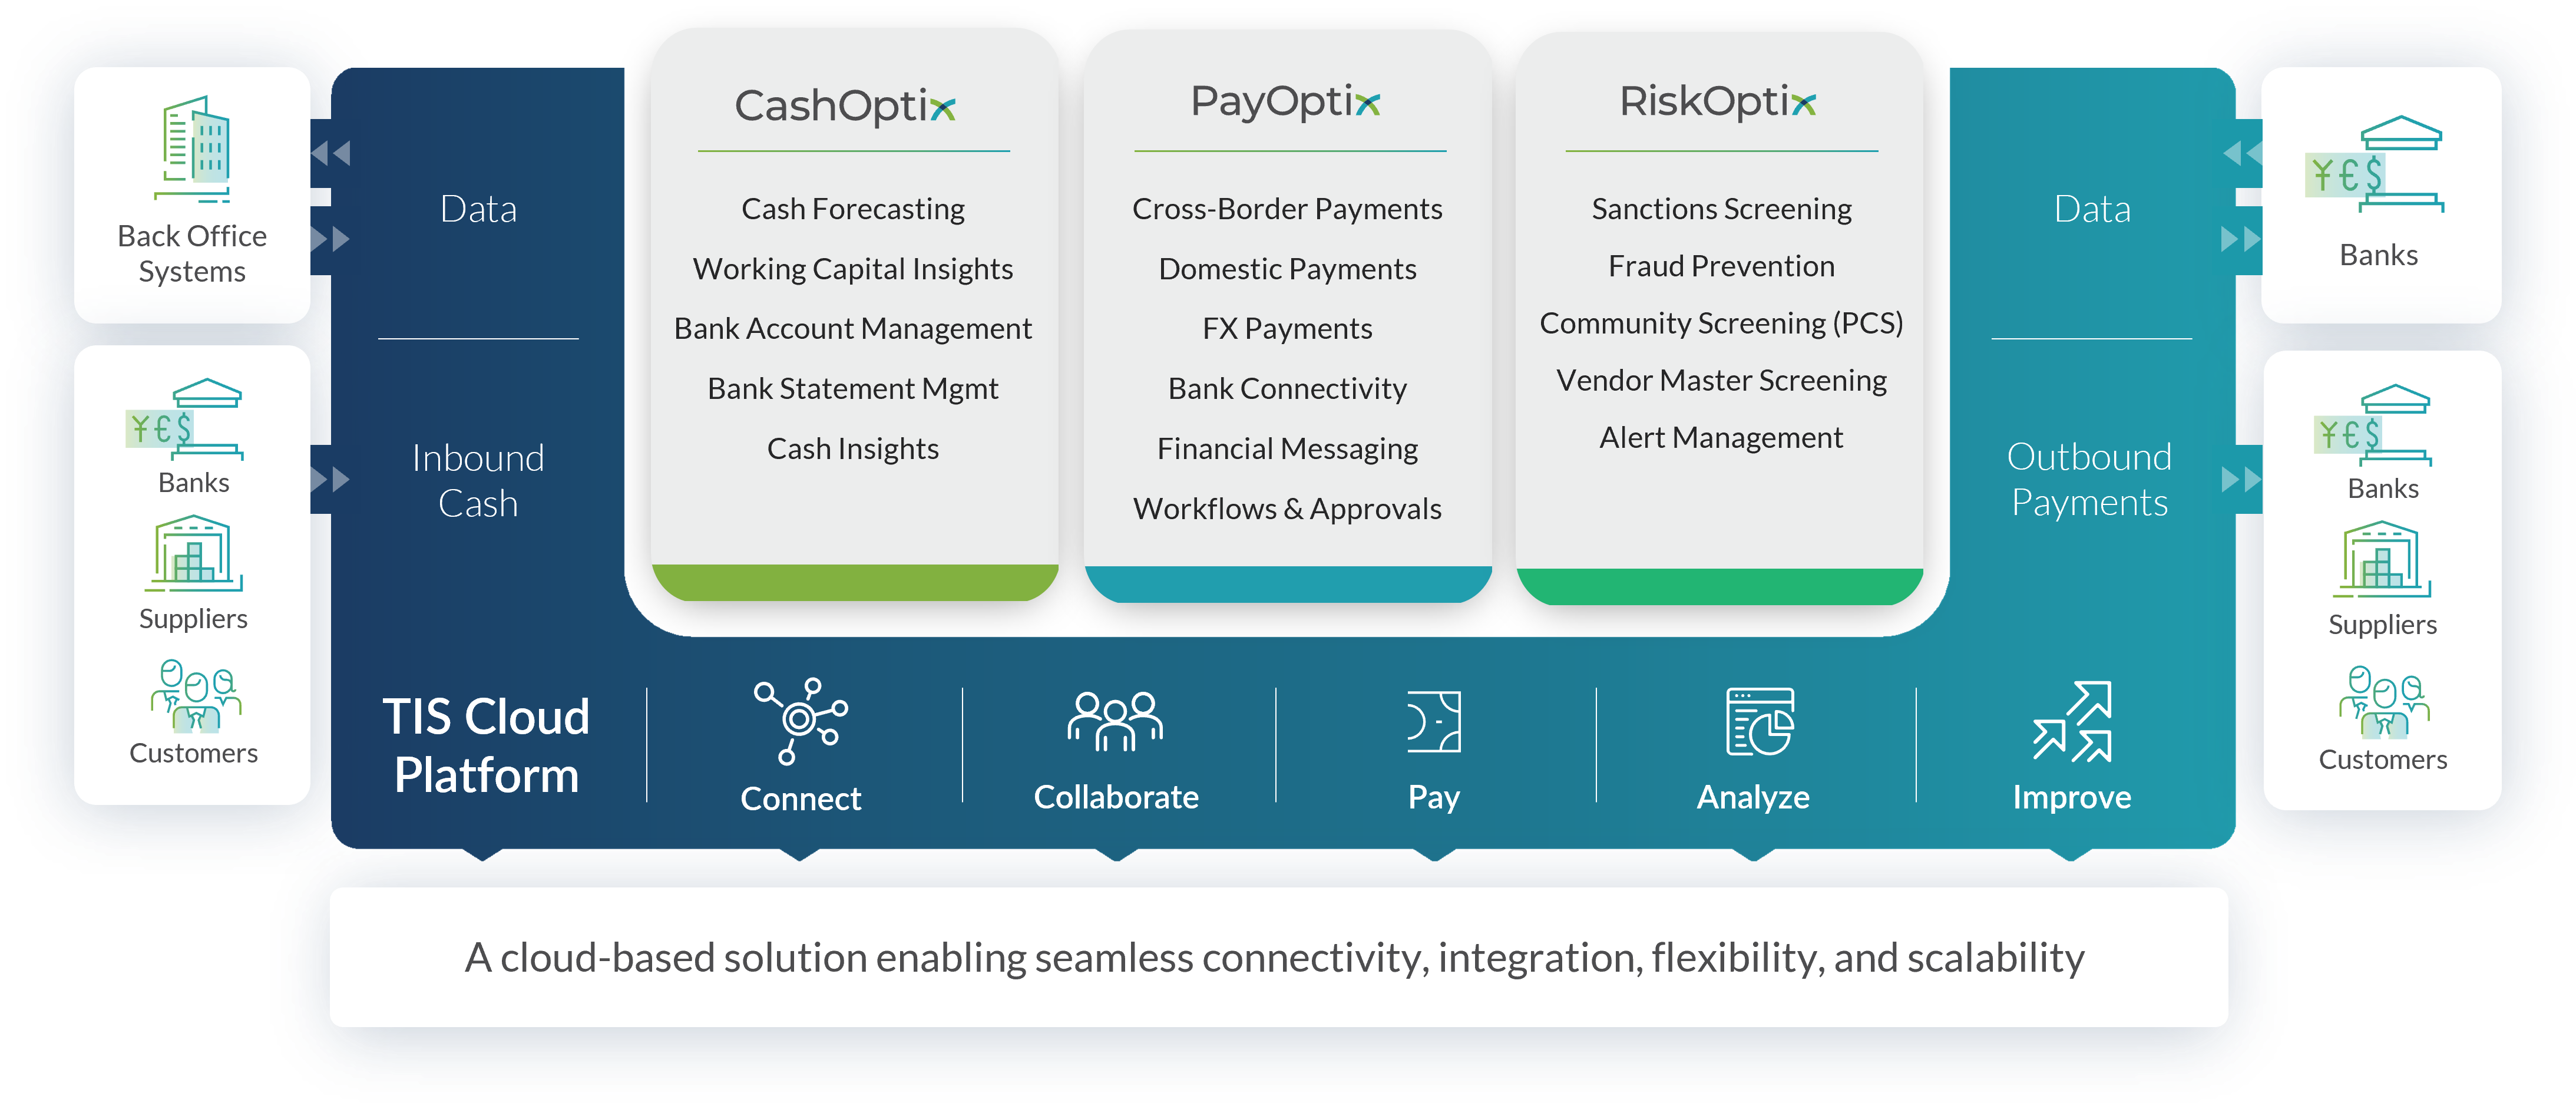 The TIS product suite provides capabilities for treasury and finance teams to manage cashflow, payments, security, and compliance functions.